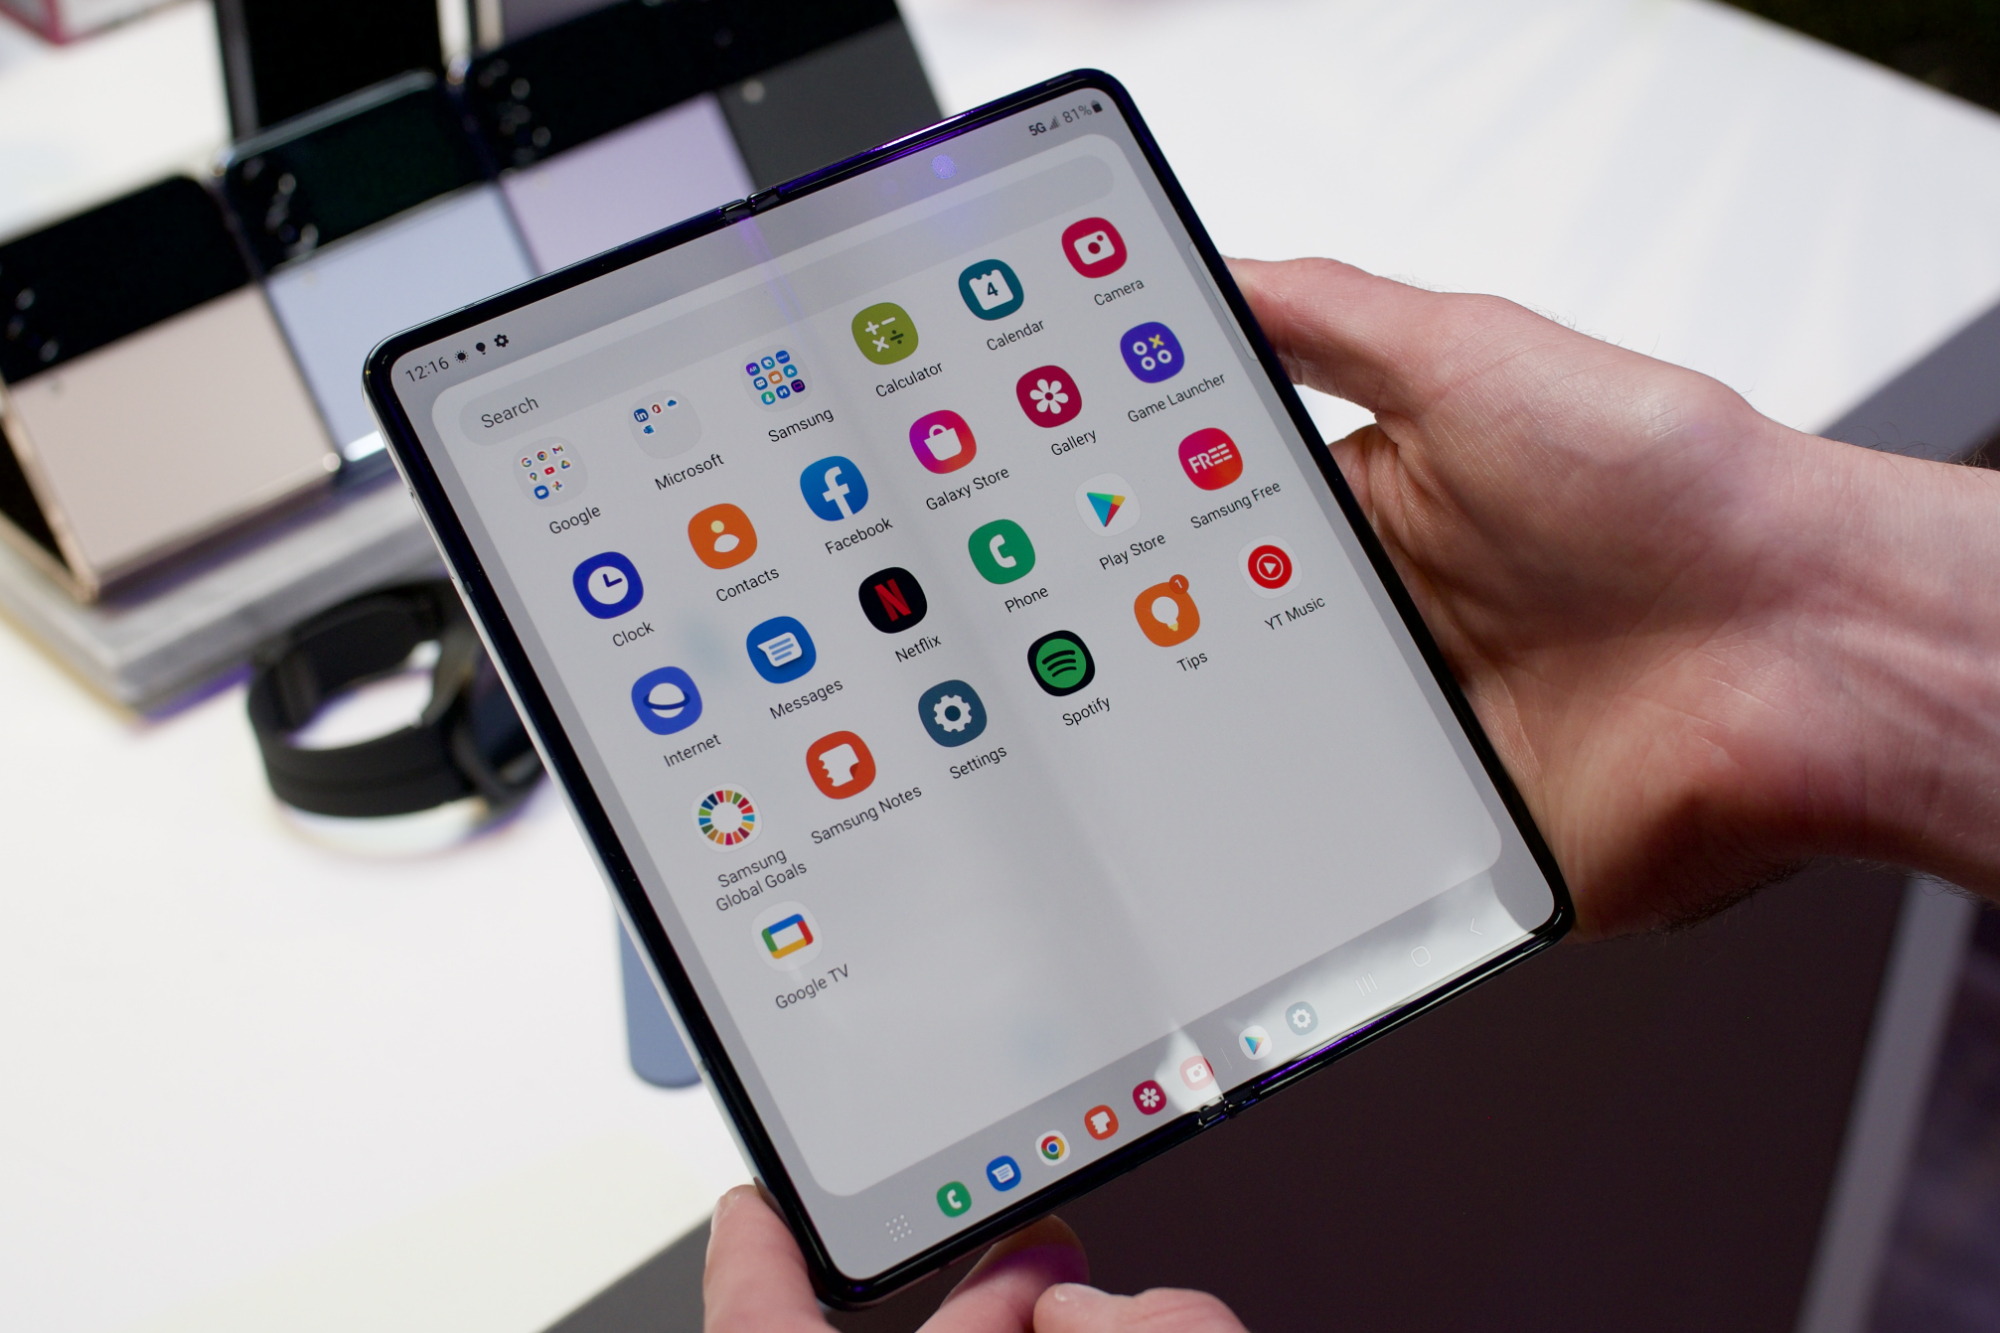 Samsung Galaxy Z Fold 4 review: A flagship foldable refined